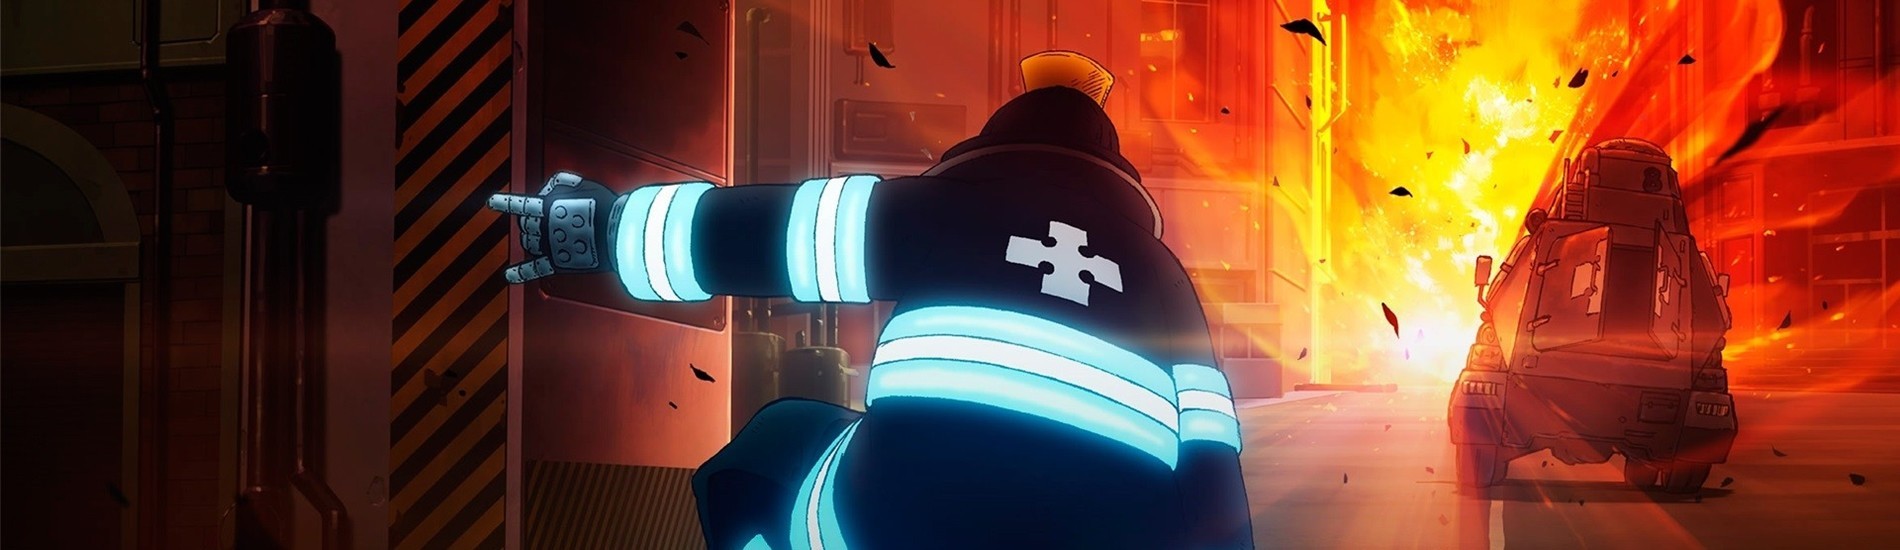 Strongest Enen no Shouboutai(Fire Force) Characters